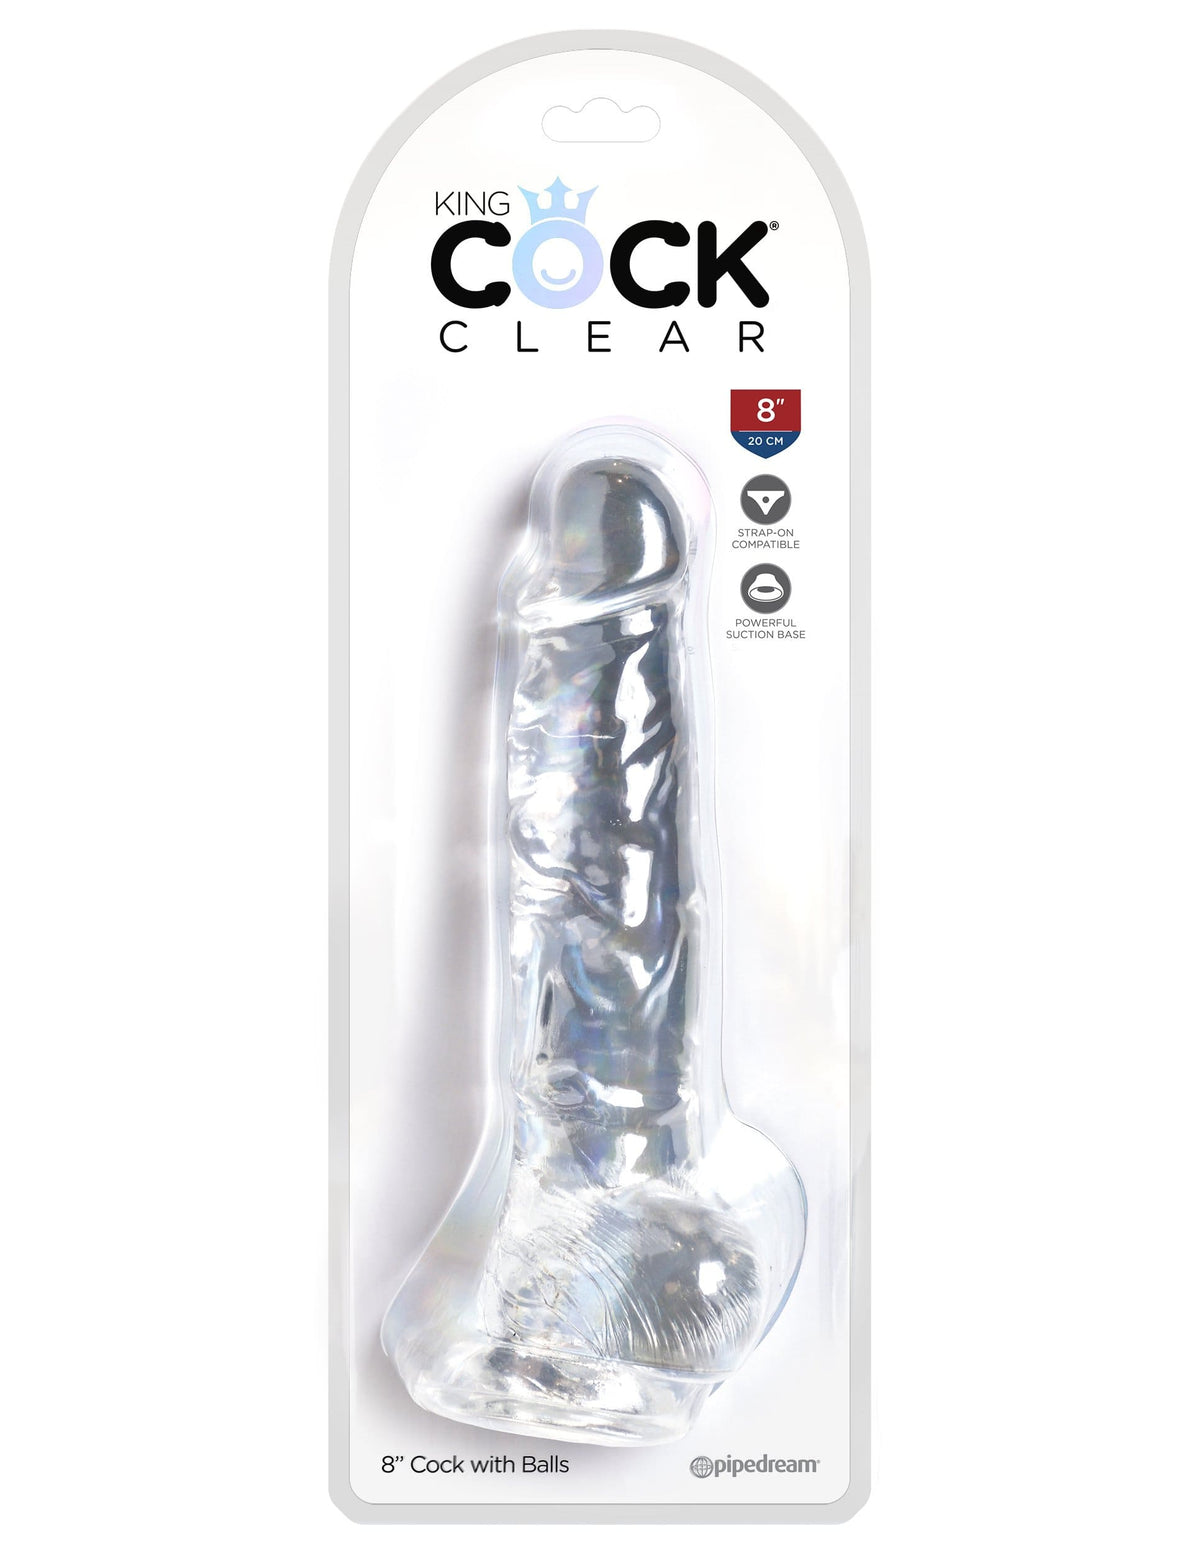 king cock clear 8 cock with balls